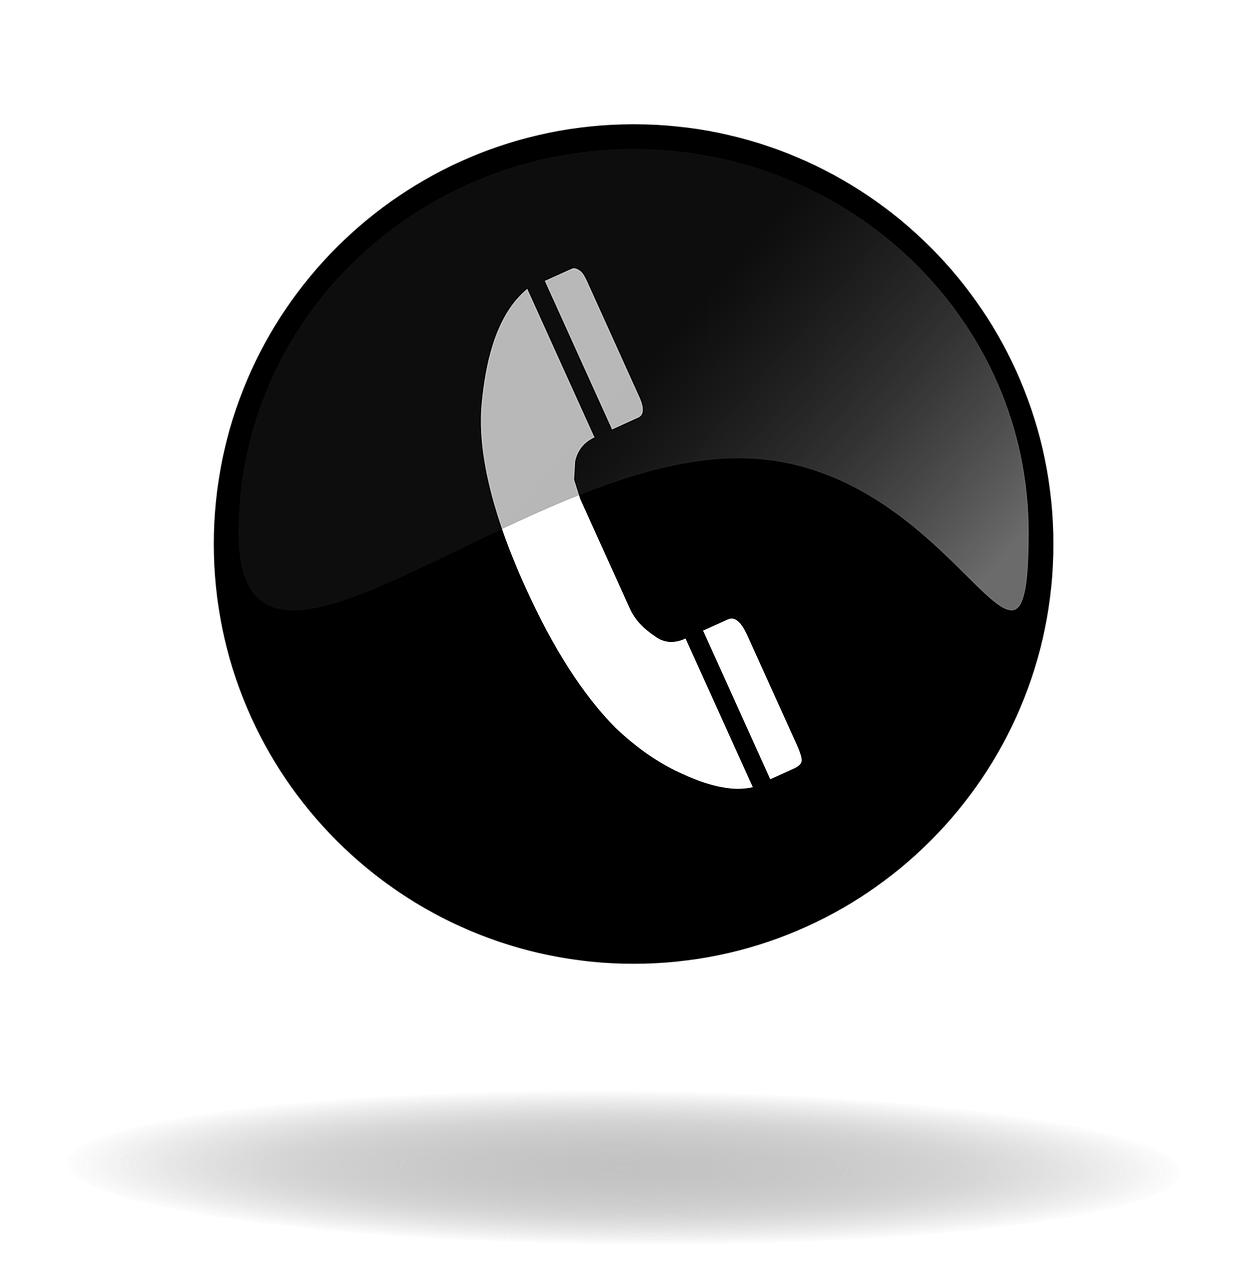 Call Call Button Black And White Png Picpng